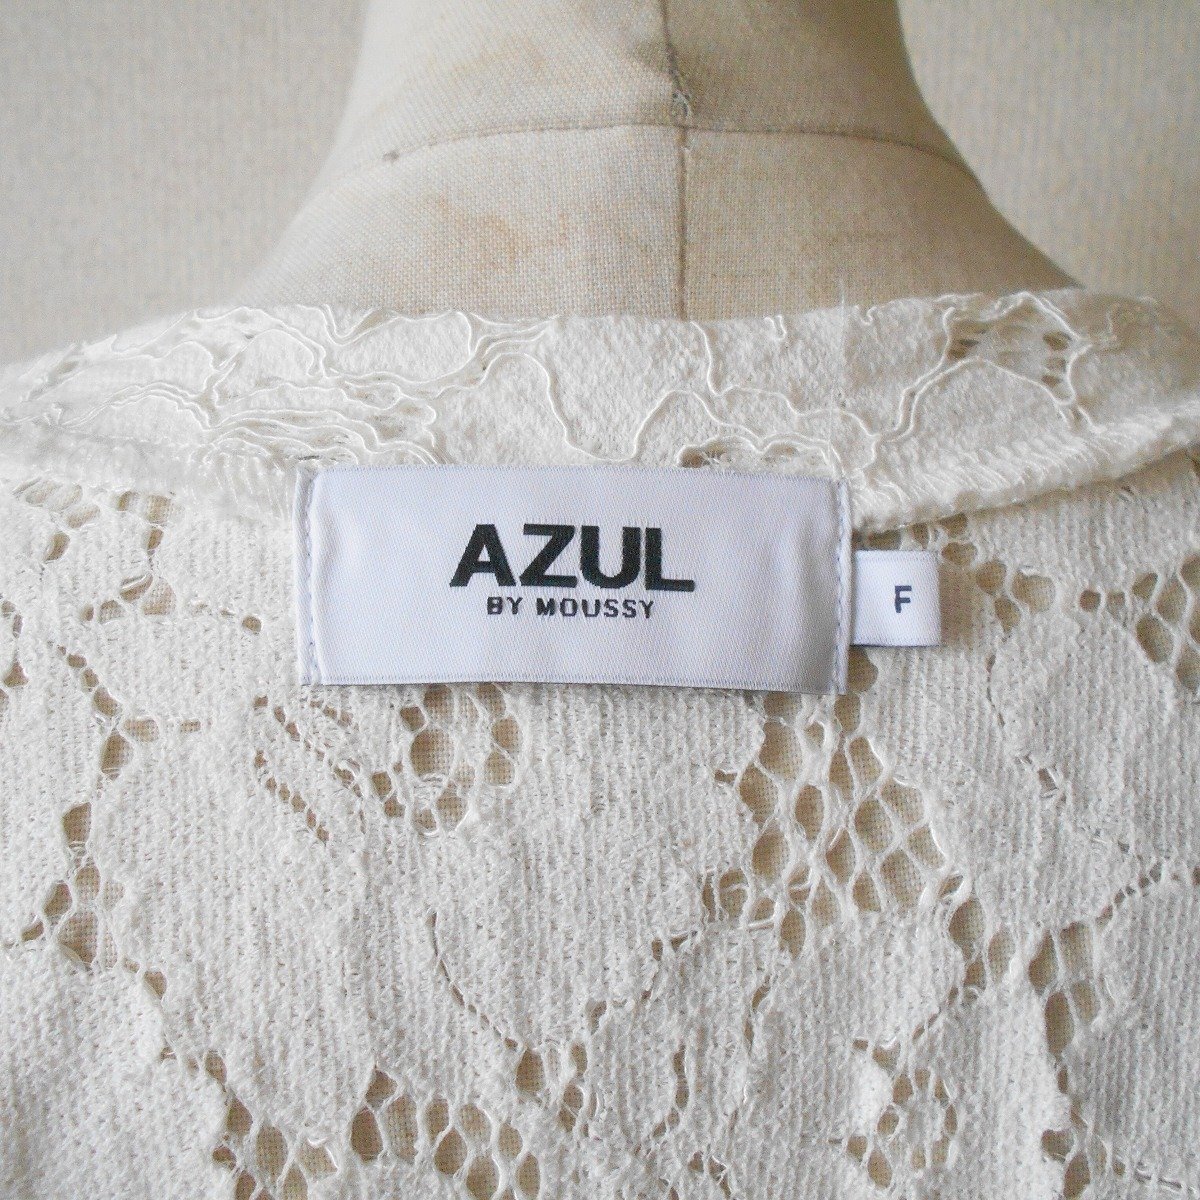  azur bai Moussy AZUL BY MOUSSY total race long cardigan lady's F